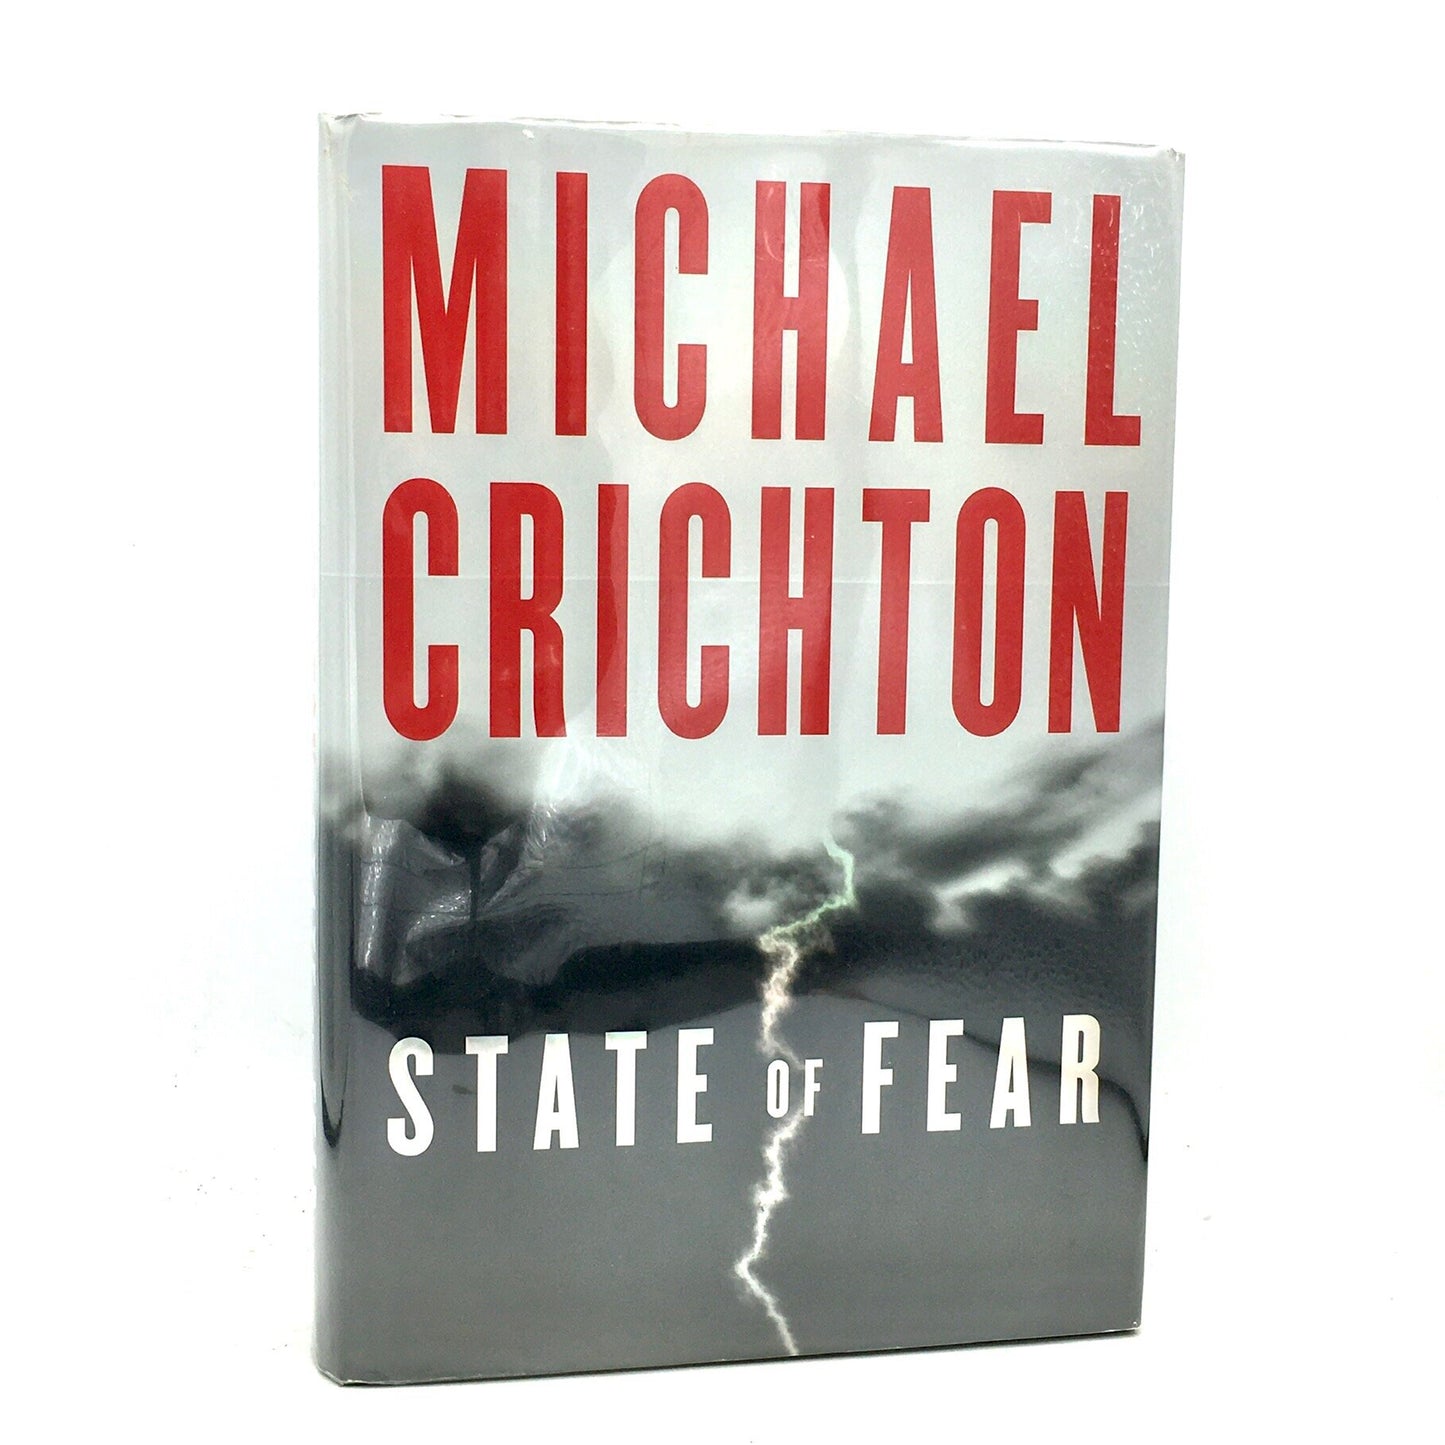 CRICHTON, Michael "State of Fear" by Michael Crichton [HarperCollins, 2004] 1st Edition (Signed) - Buzz Bookstore